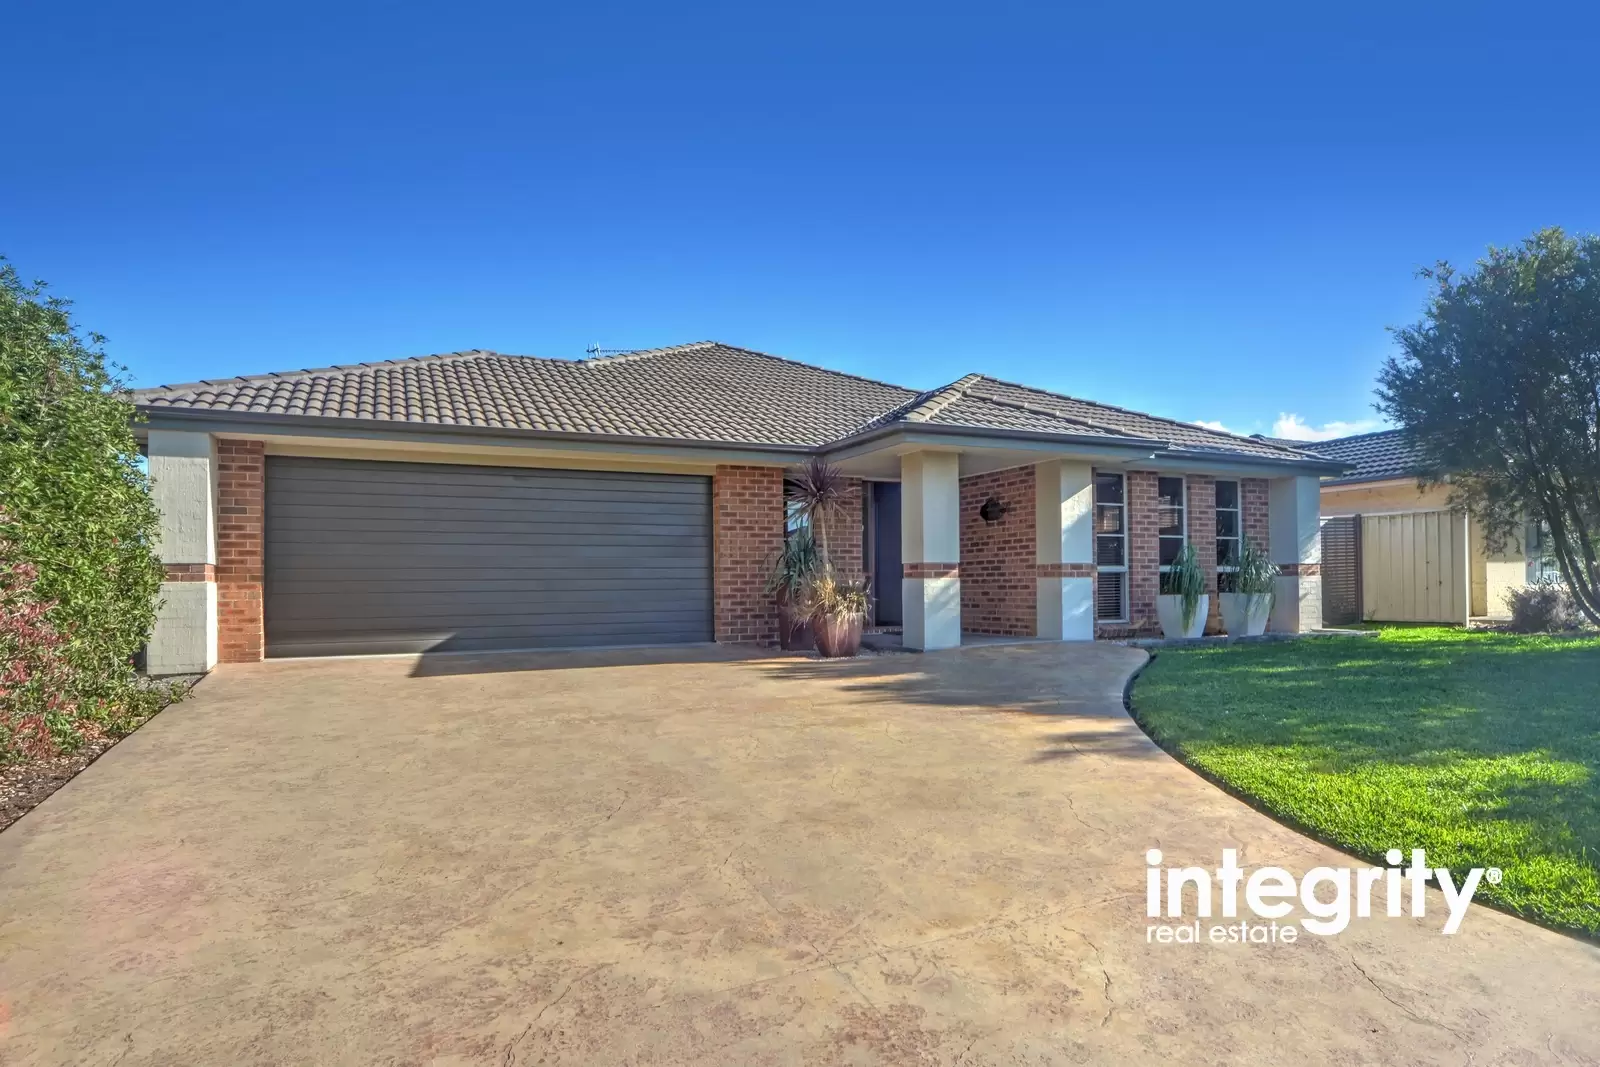 10 Gumnut Way, North Nowra Sold by Integrity Real Estate - image 1